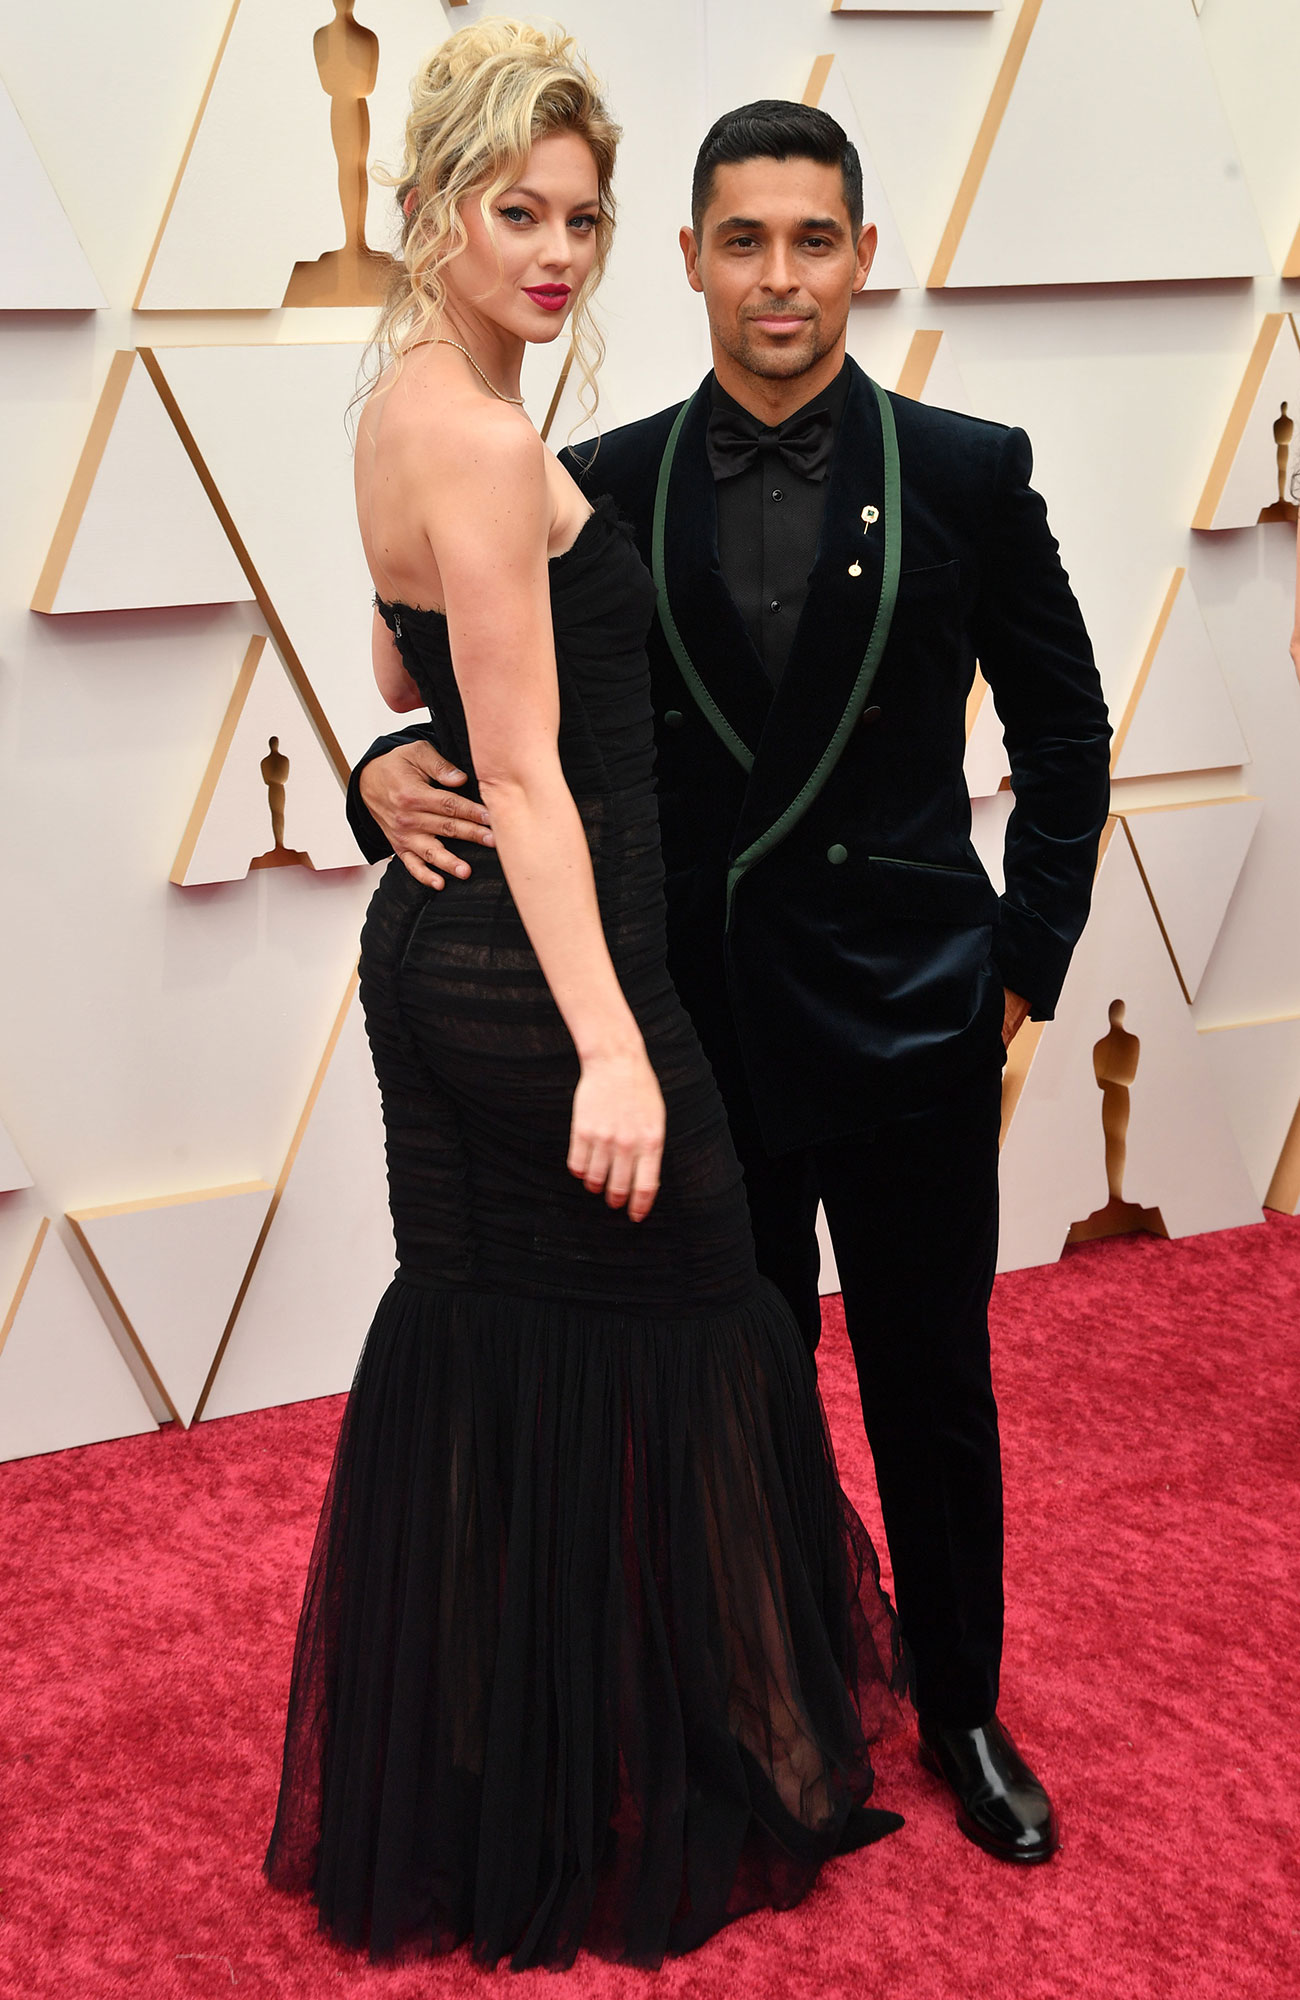 Oscars 2022 See Hottest Couples on the Red Carpet